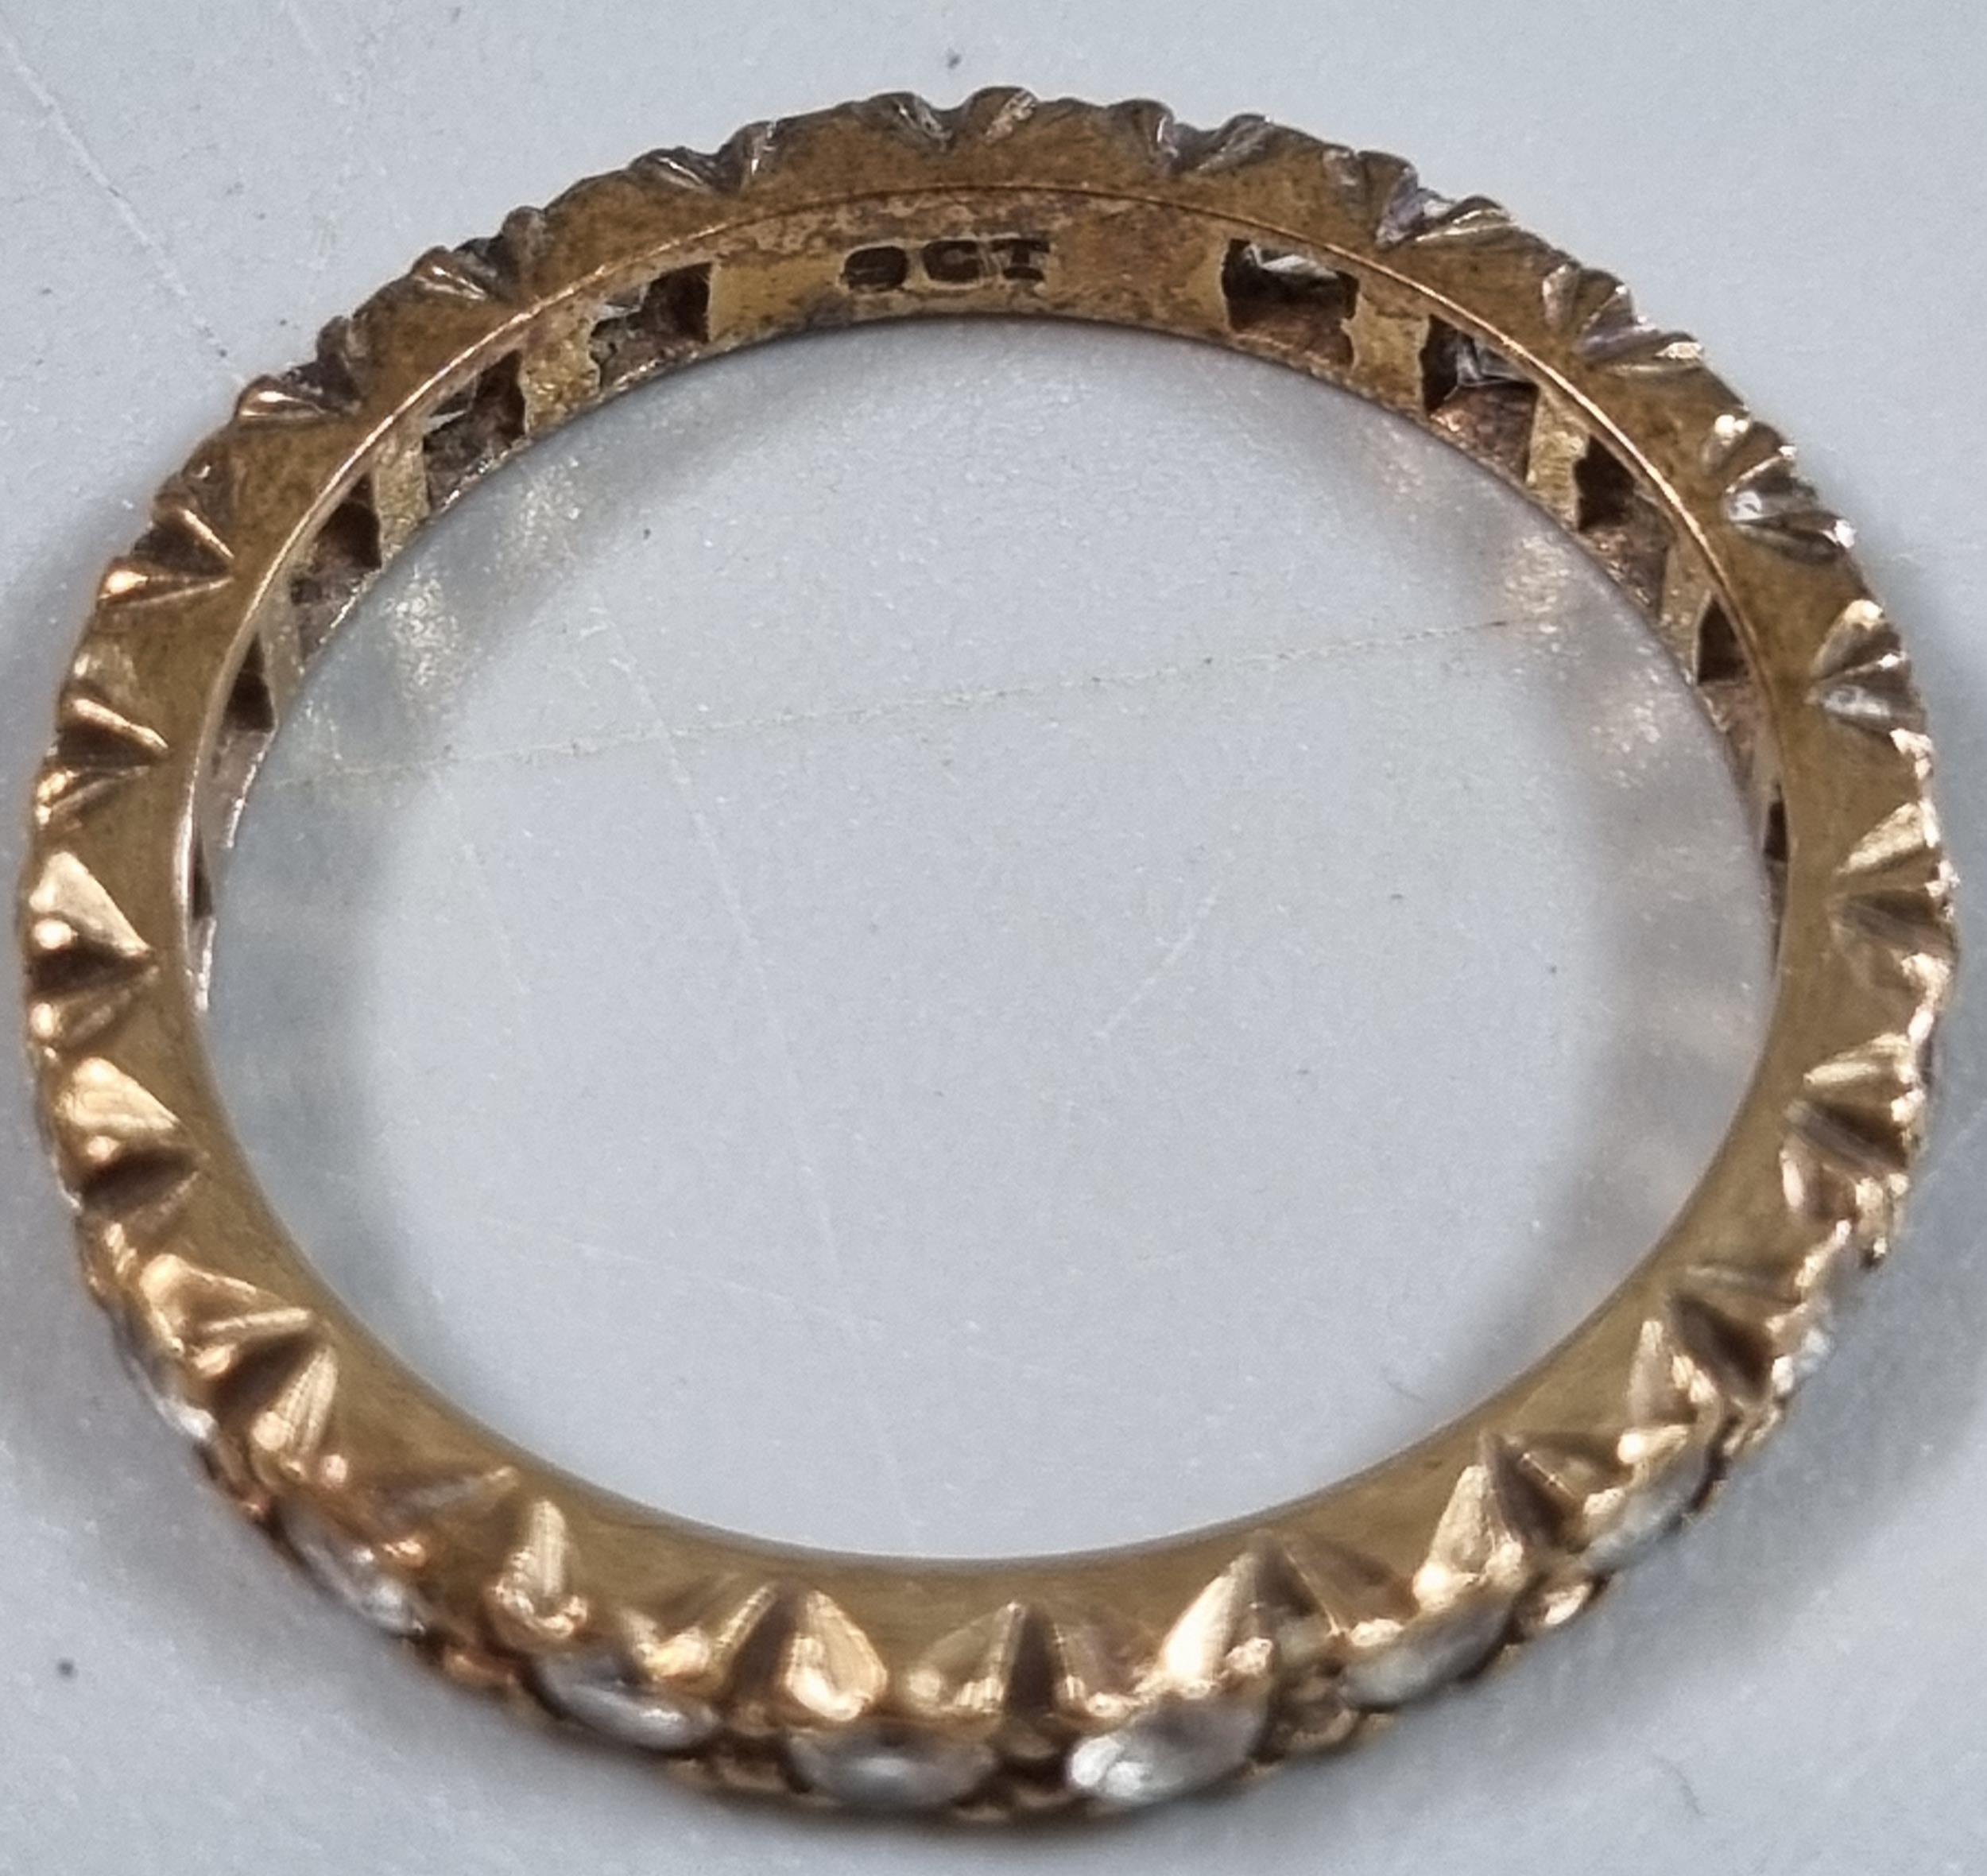 9ct gold full eternity style ring with white paste stones. 1.8g approx. Size M1/2. (B.P. 21% + VAT) - Image 3 of 4